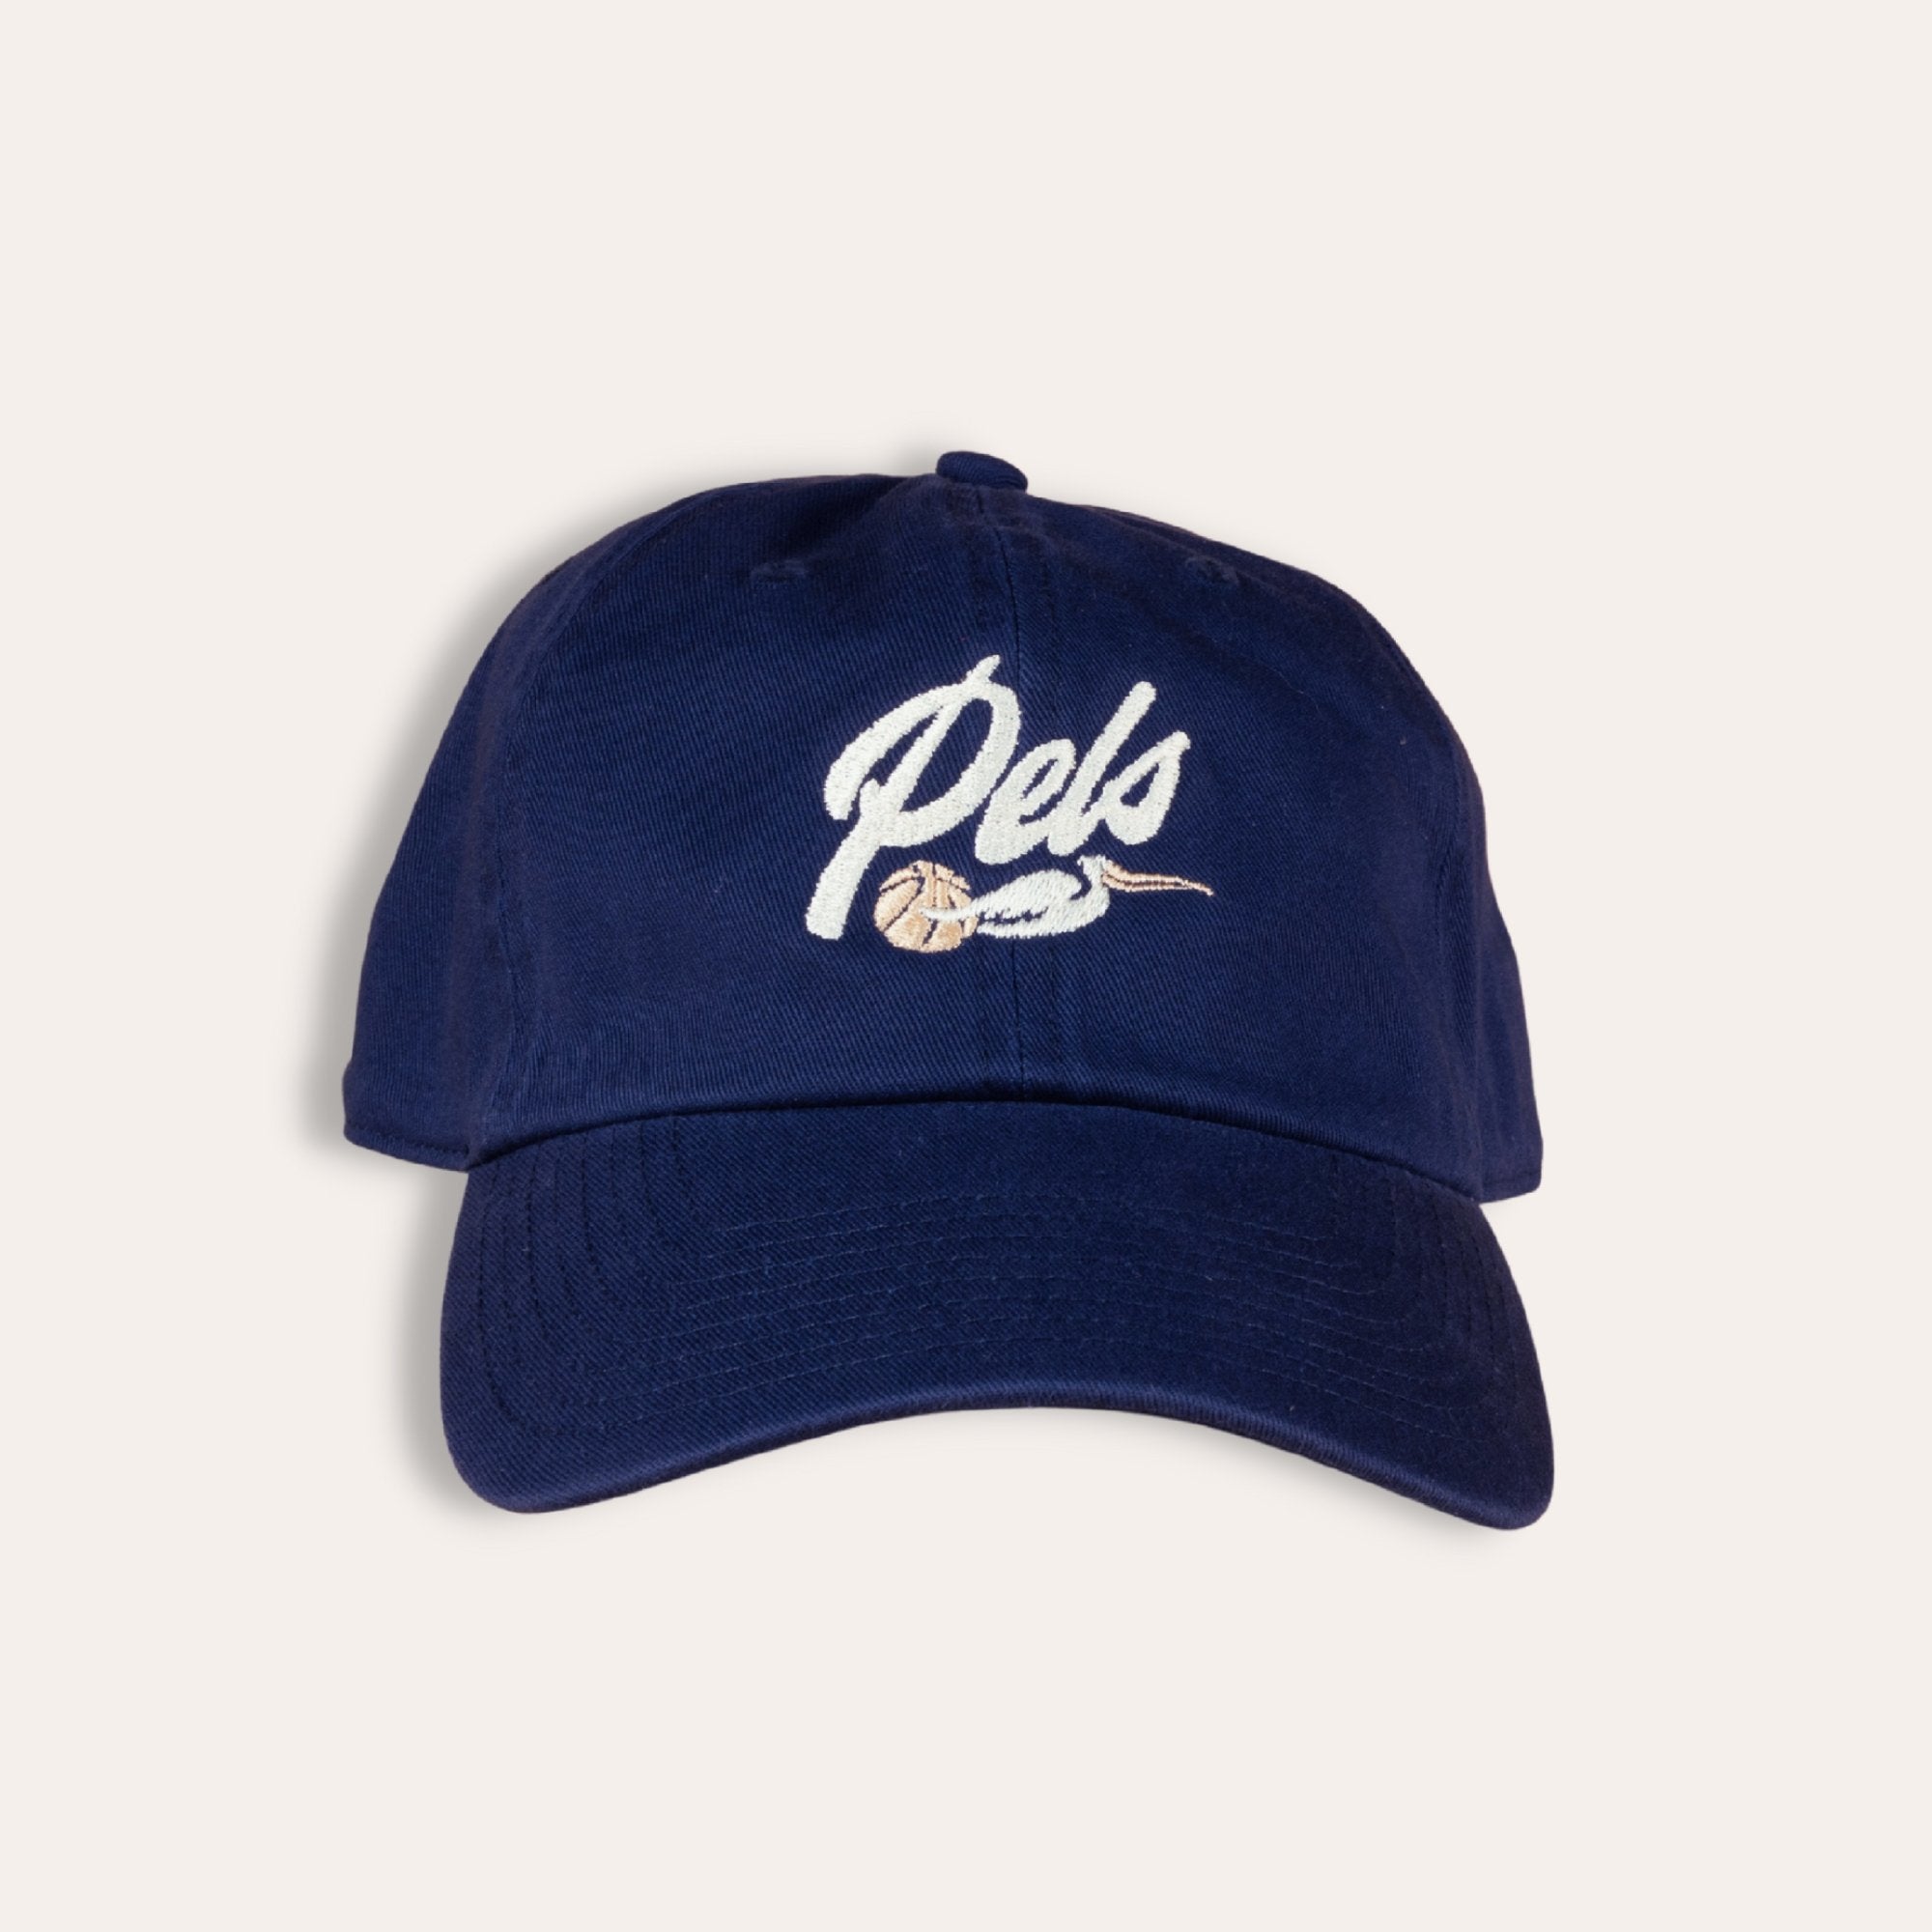 Fly Me To The Rim Hat by '47 Brands - Dirty Coast Press